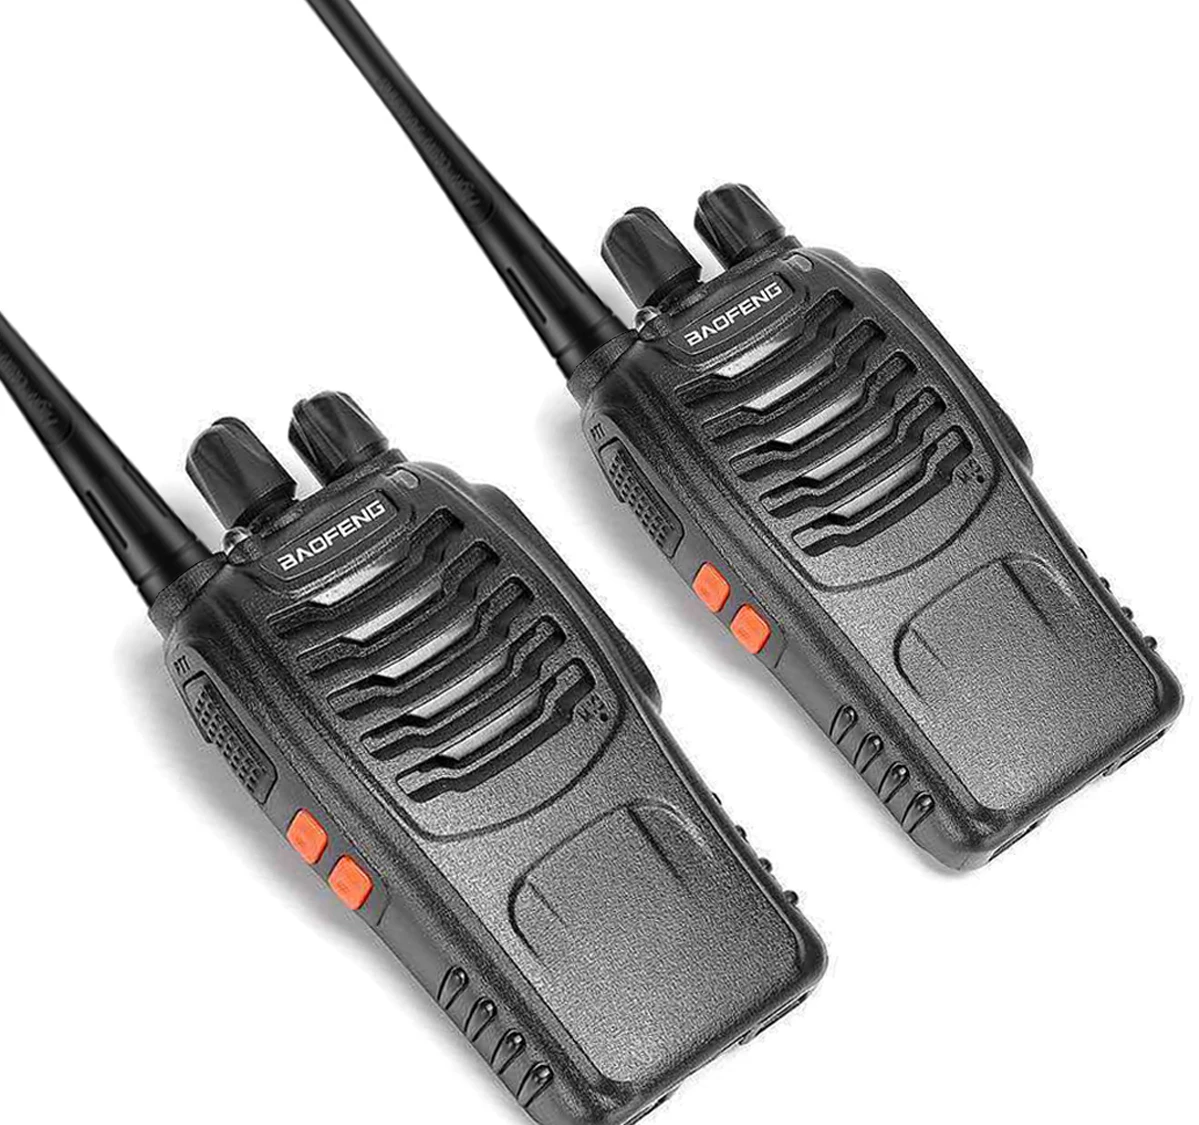 Bao feng walkie talkie 2 pcs included two way radios BF-888S protable radio powerful Push-button phone for hunting